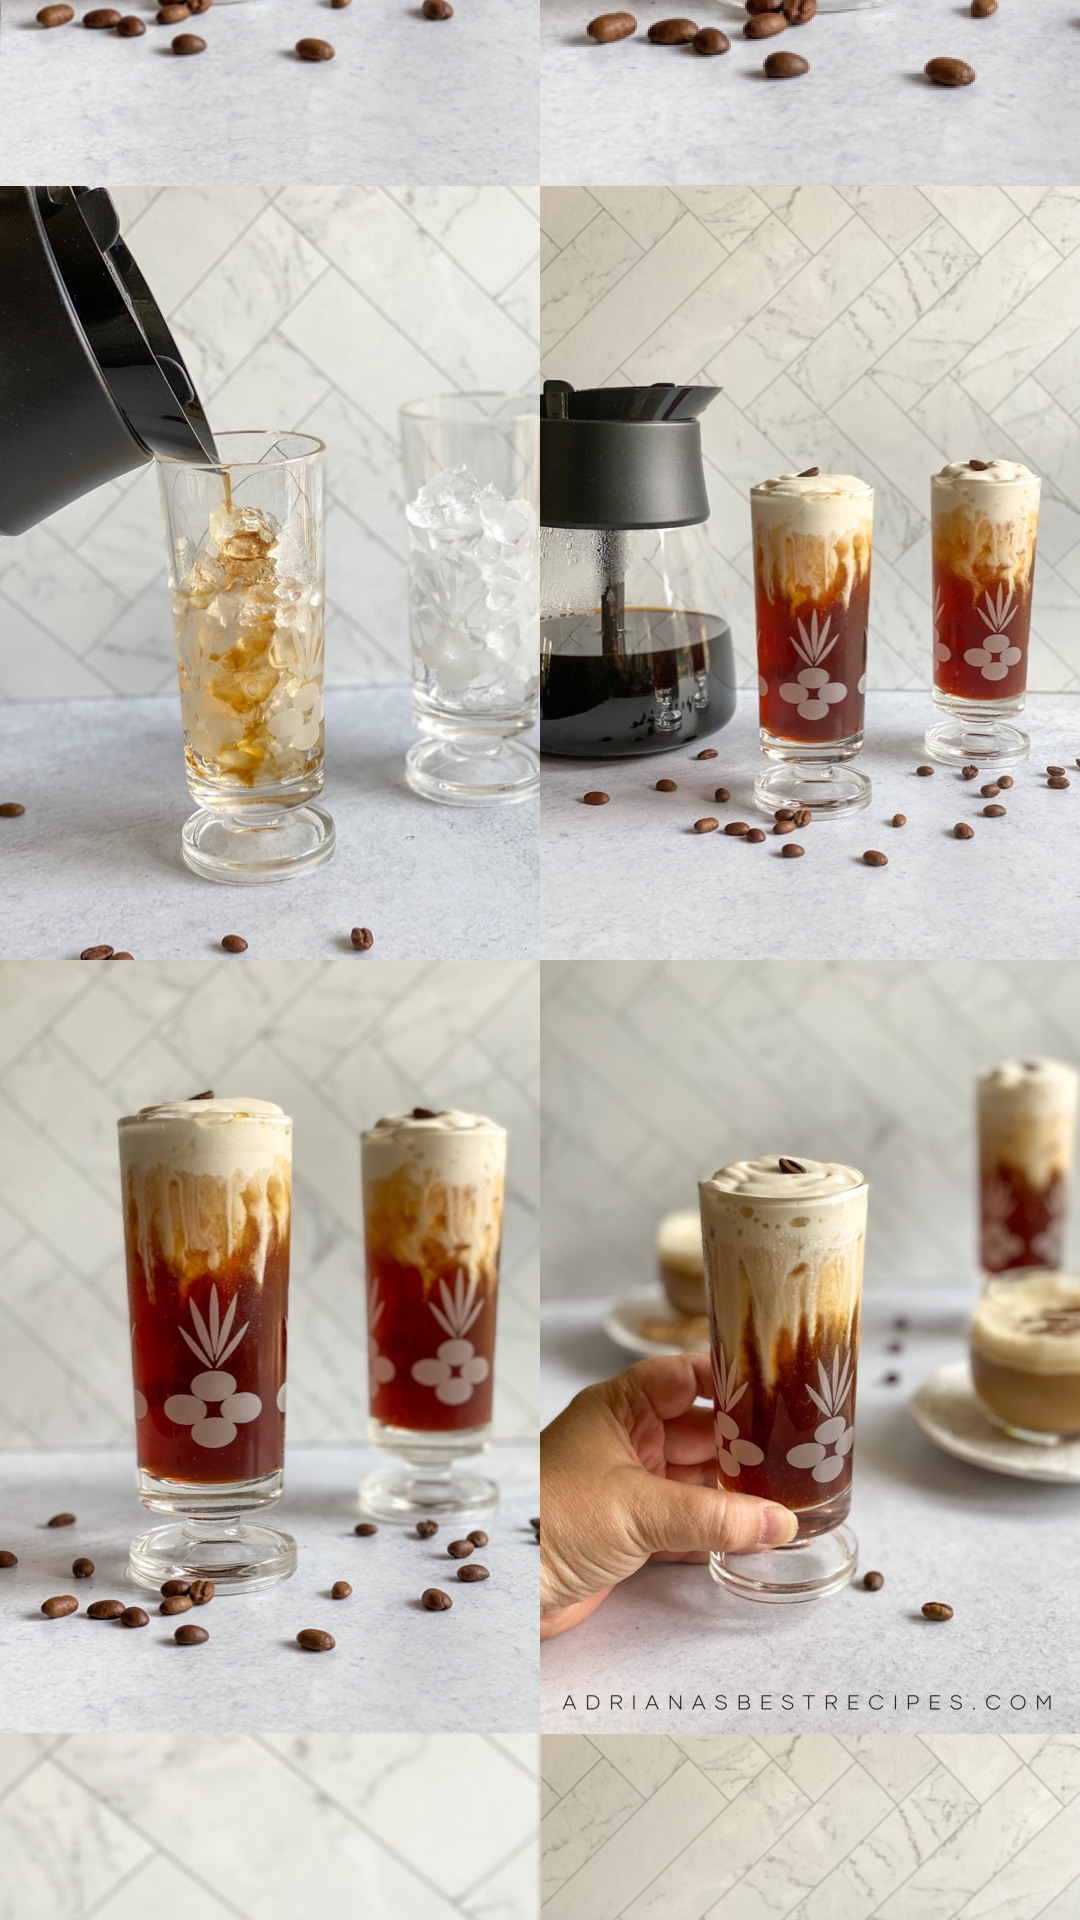 step by step on how to make an Irish Frappe